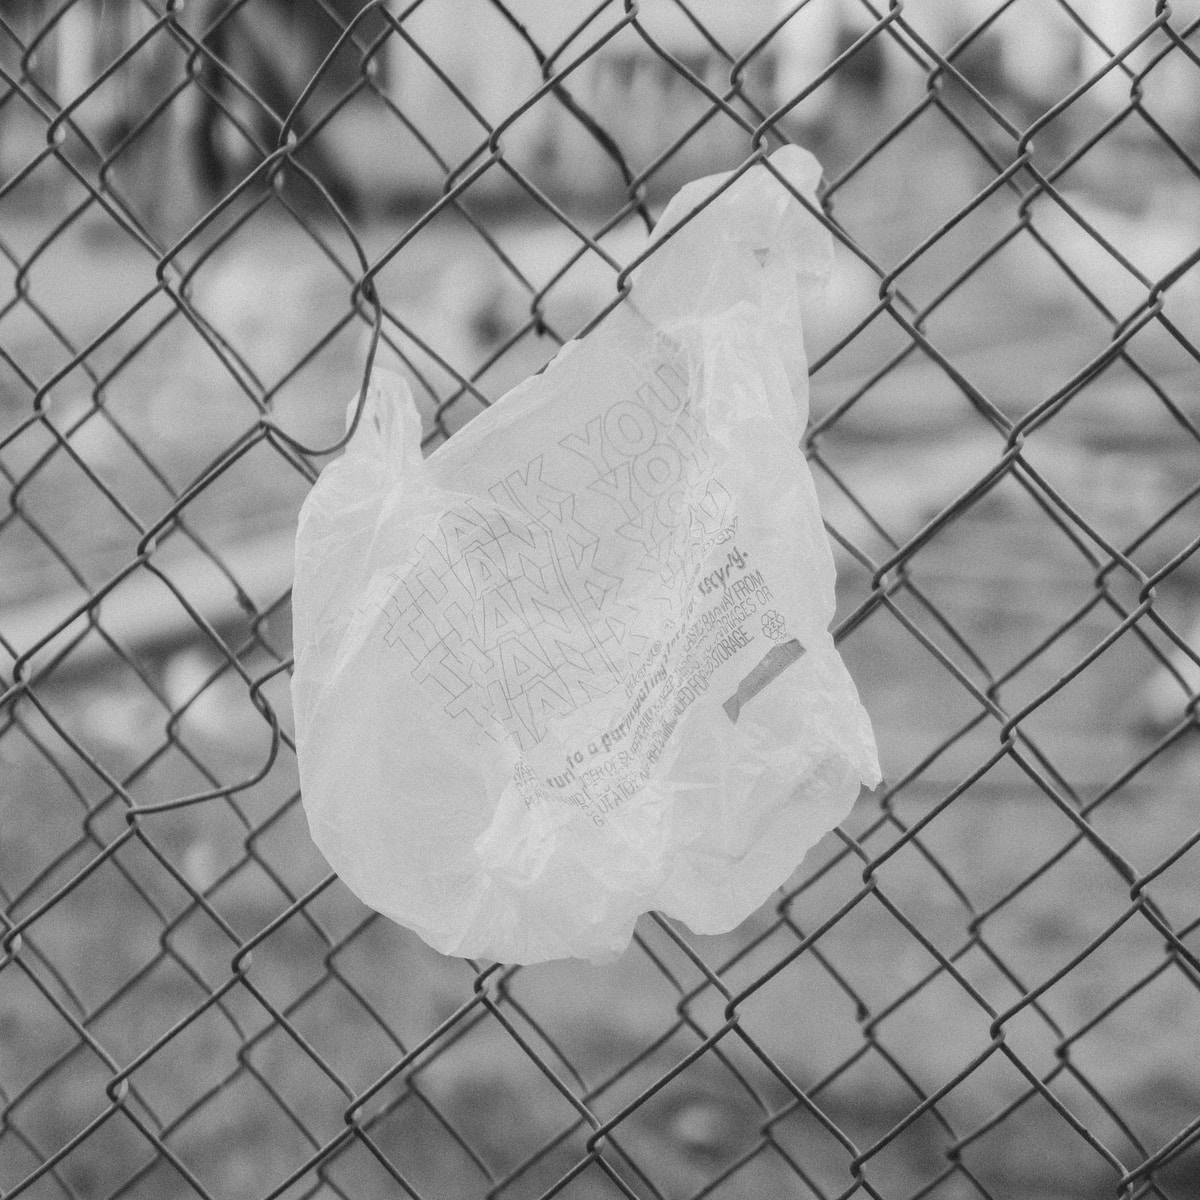 white plastic bag on chain link fence